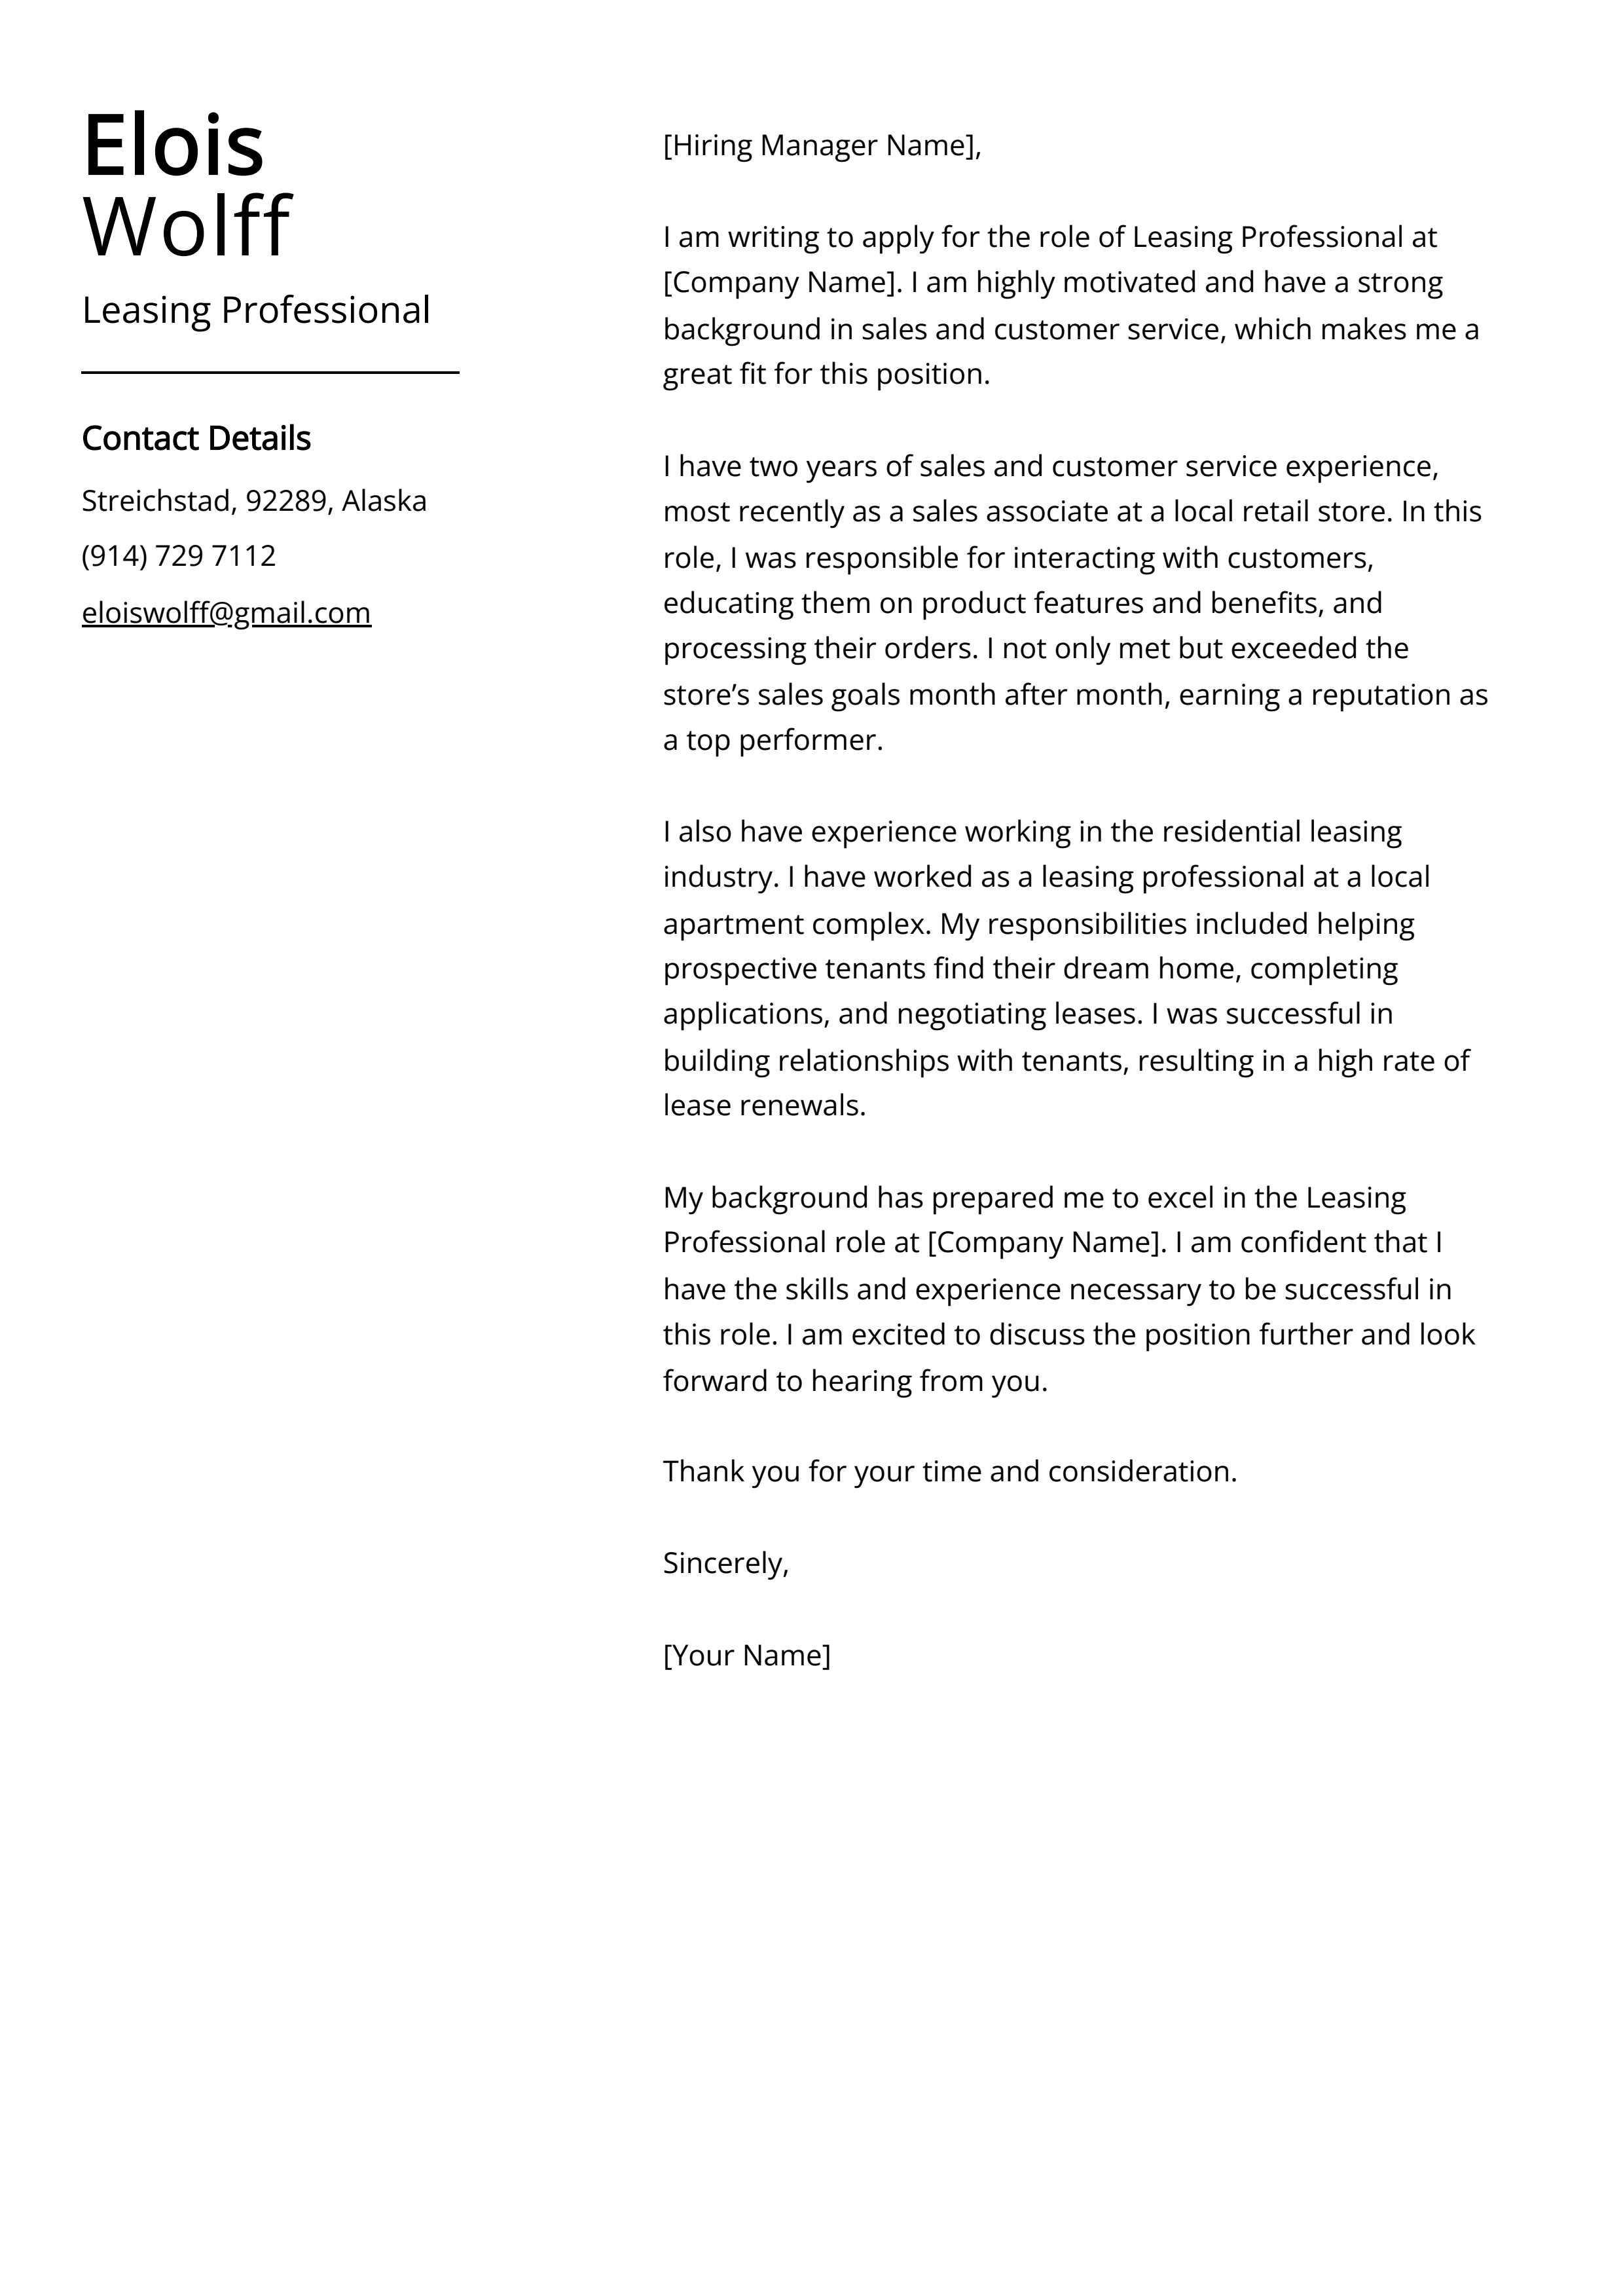 Leasing Professional Cover Letter Example